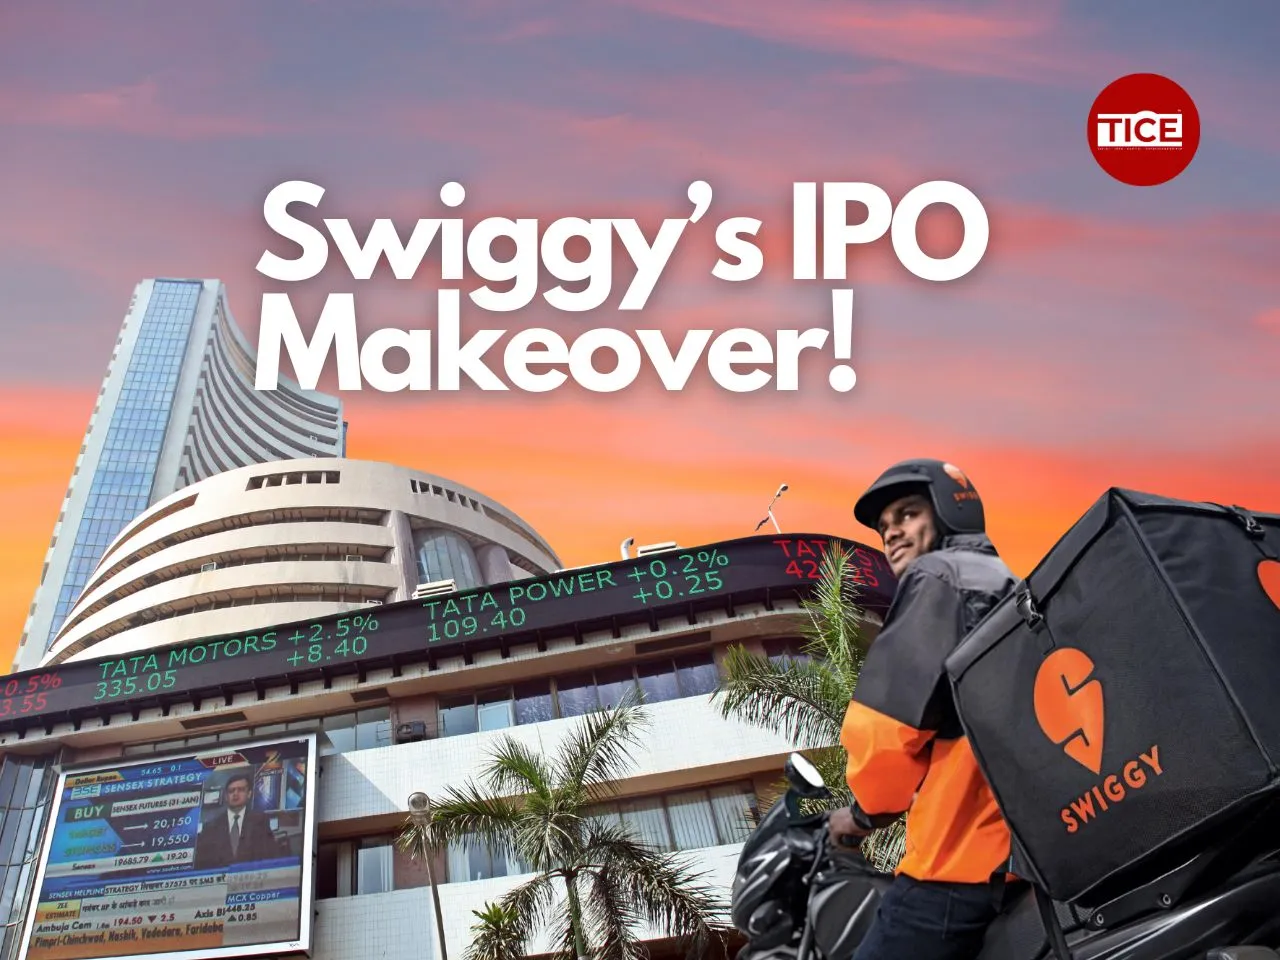 Why Is Swiggy No Longer a Private Company? What's Swiggy's IPO Date?